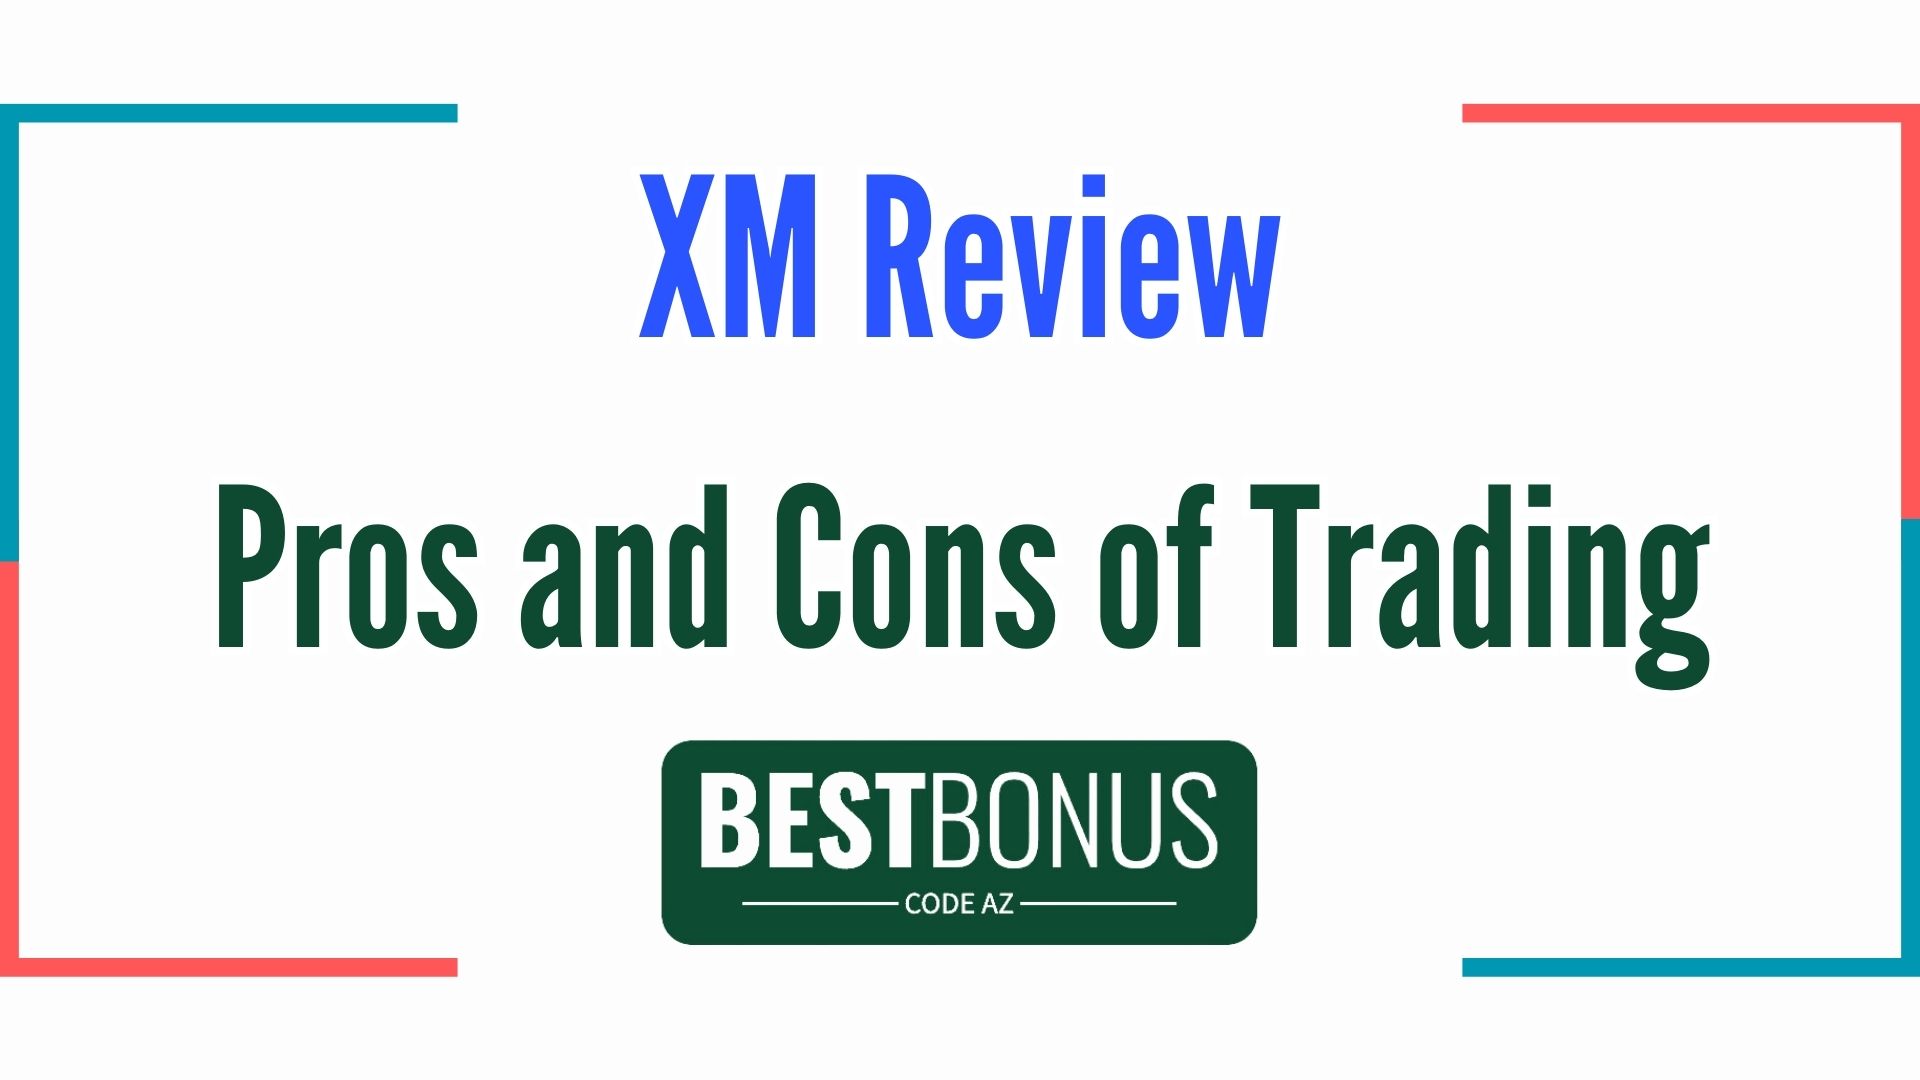 XM Review Pros and Cons of Trading with XM Review